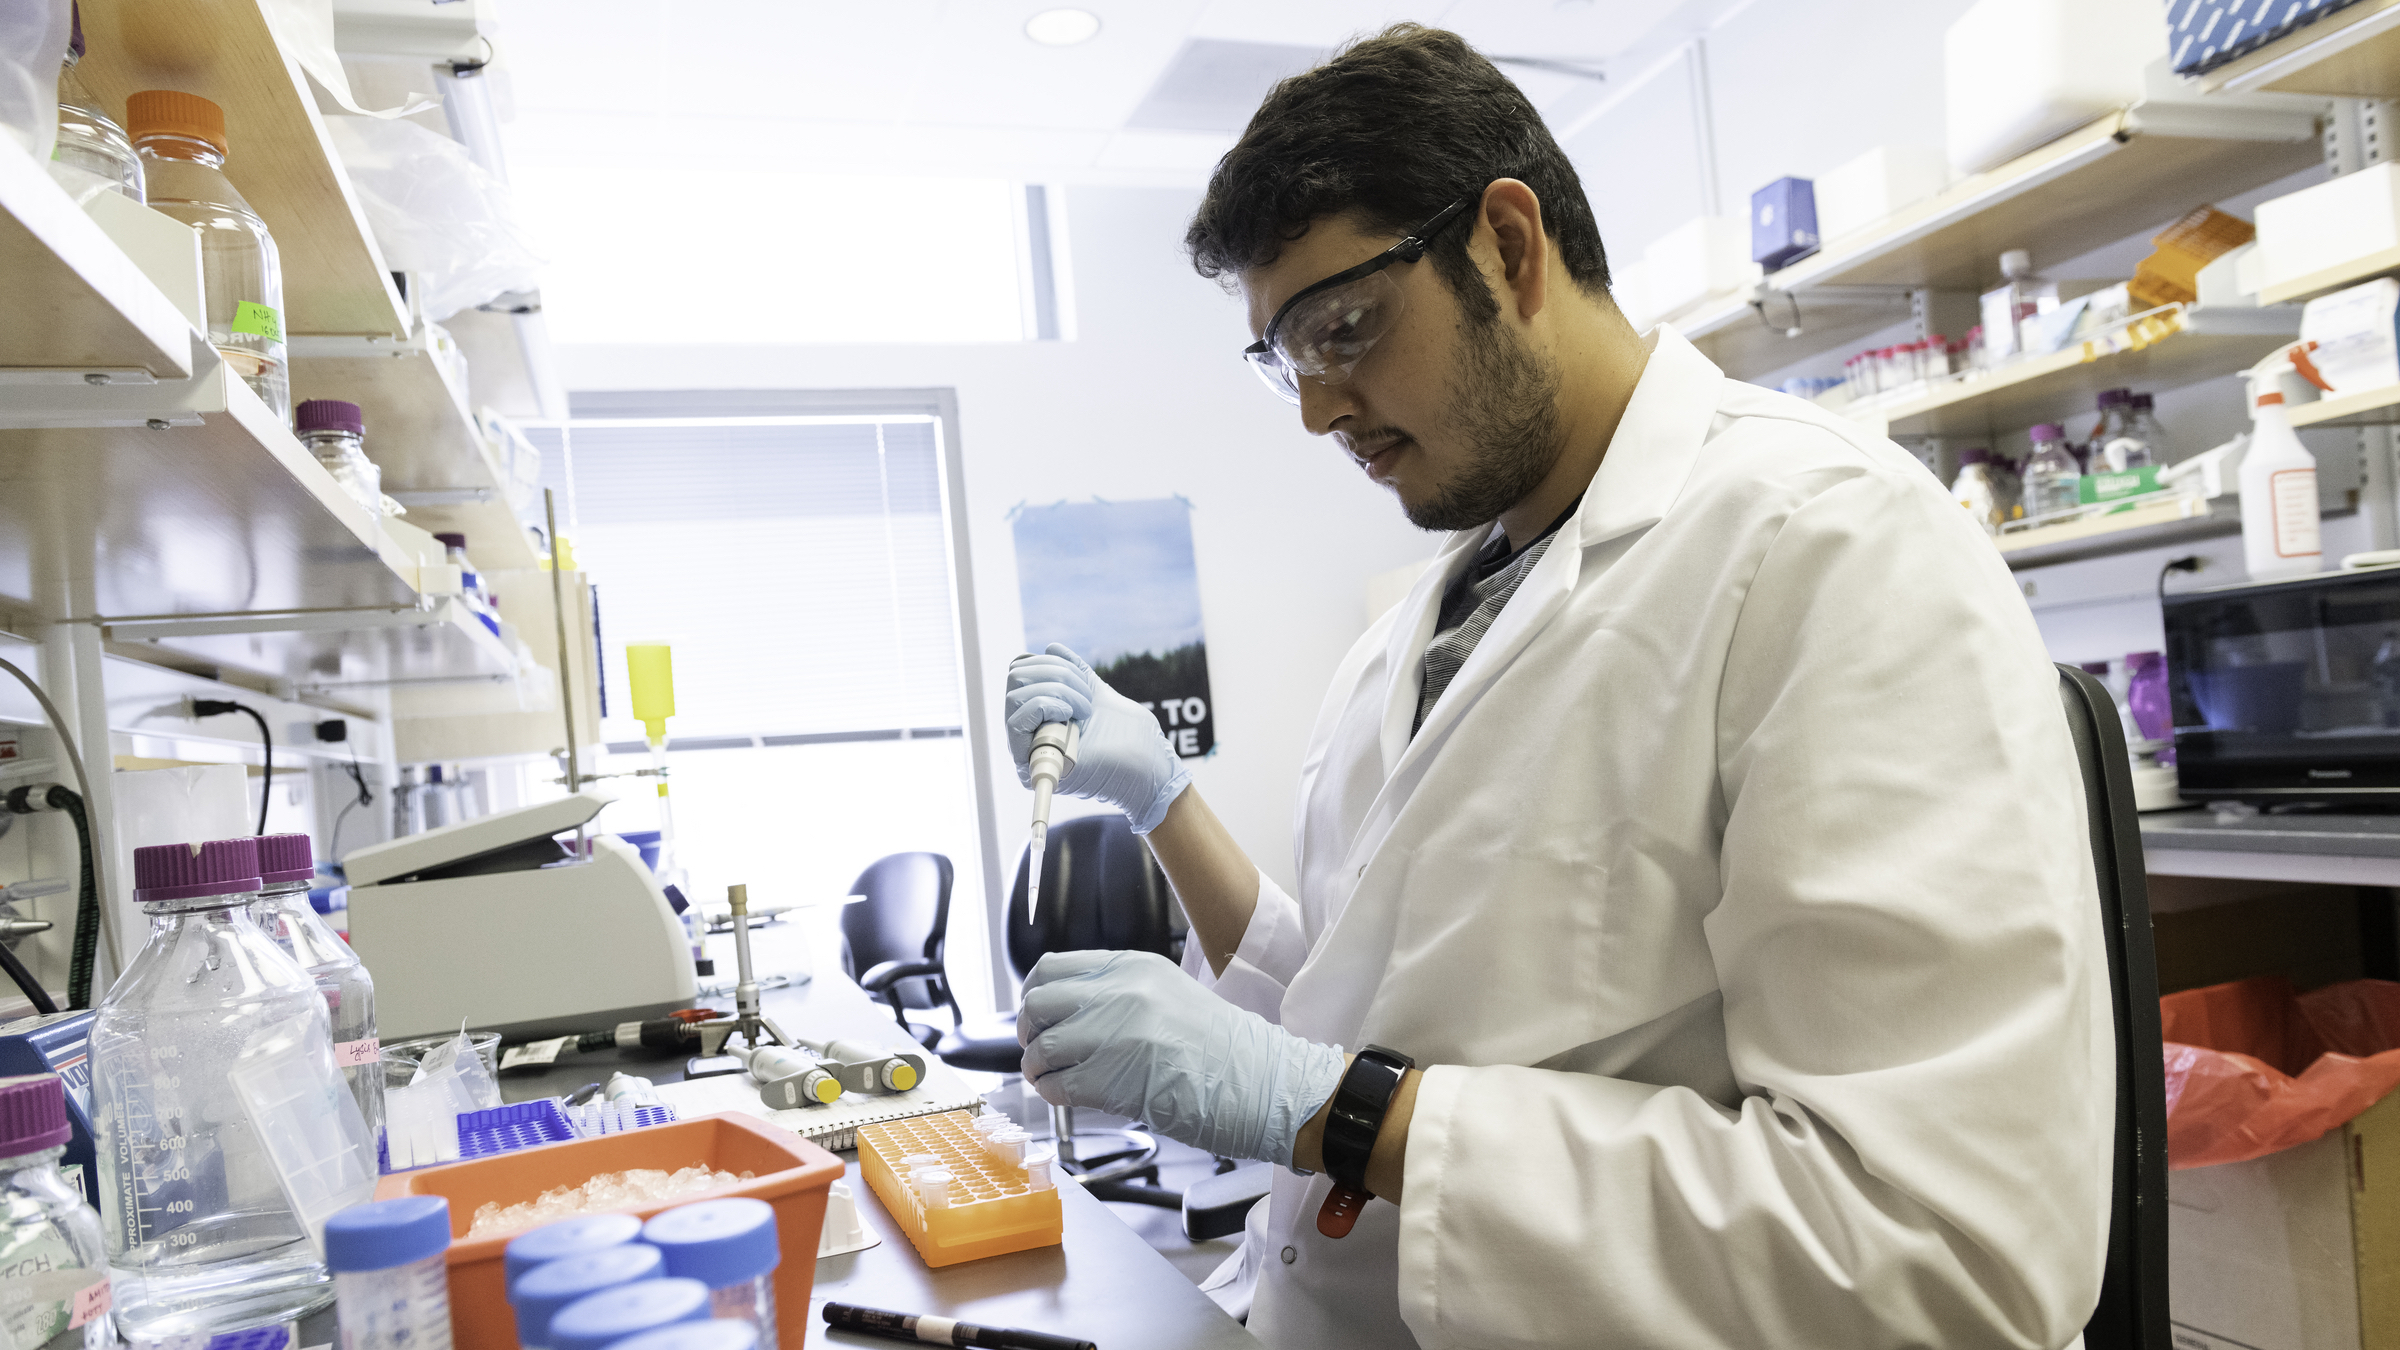 A graduate student in a white coat pipettes in a lab wearing gloves